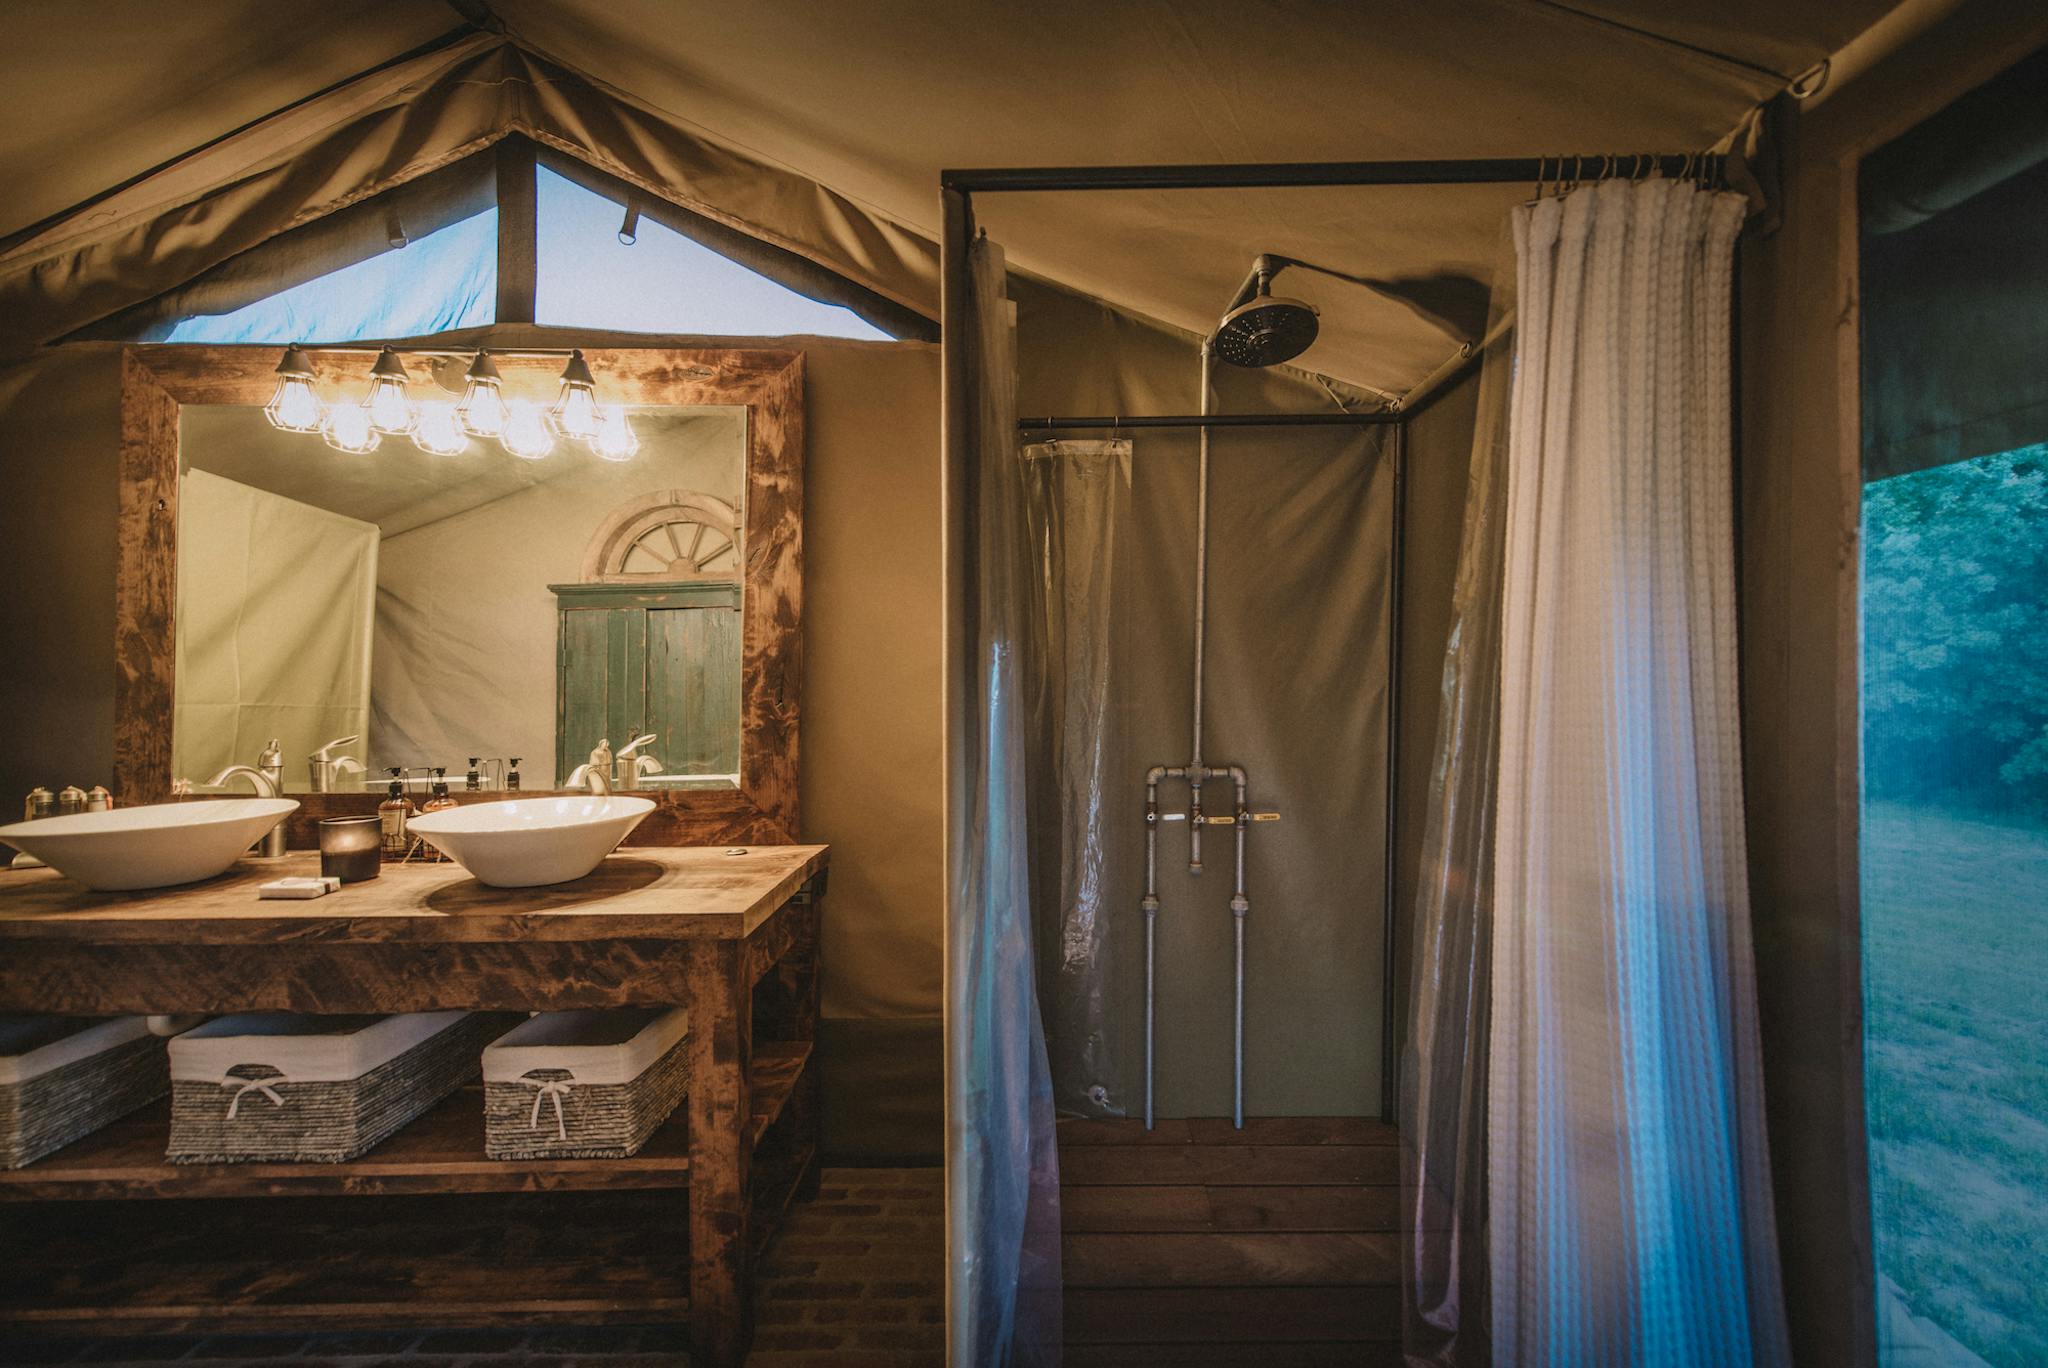 Sink, shower, and mirror of the indoor bathroom of the Safari Tent.